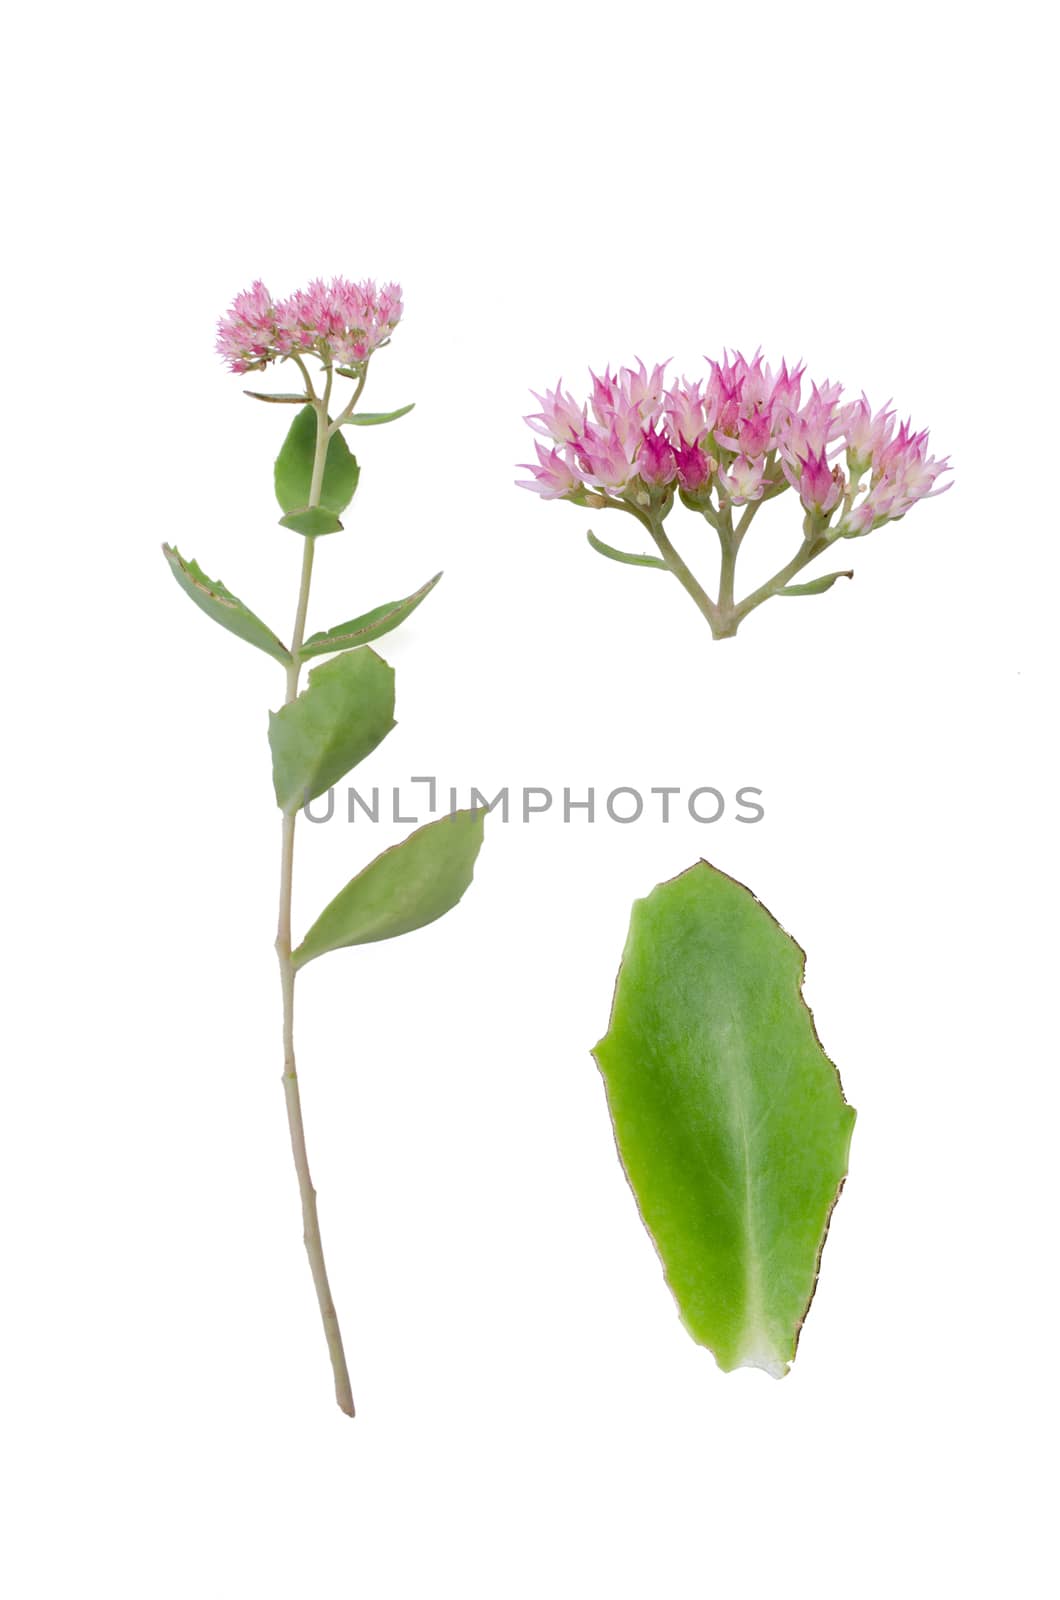 Sedum Herbstfreude with details of leaf and bloom isolated on white background.